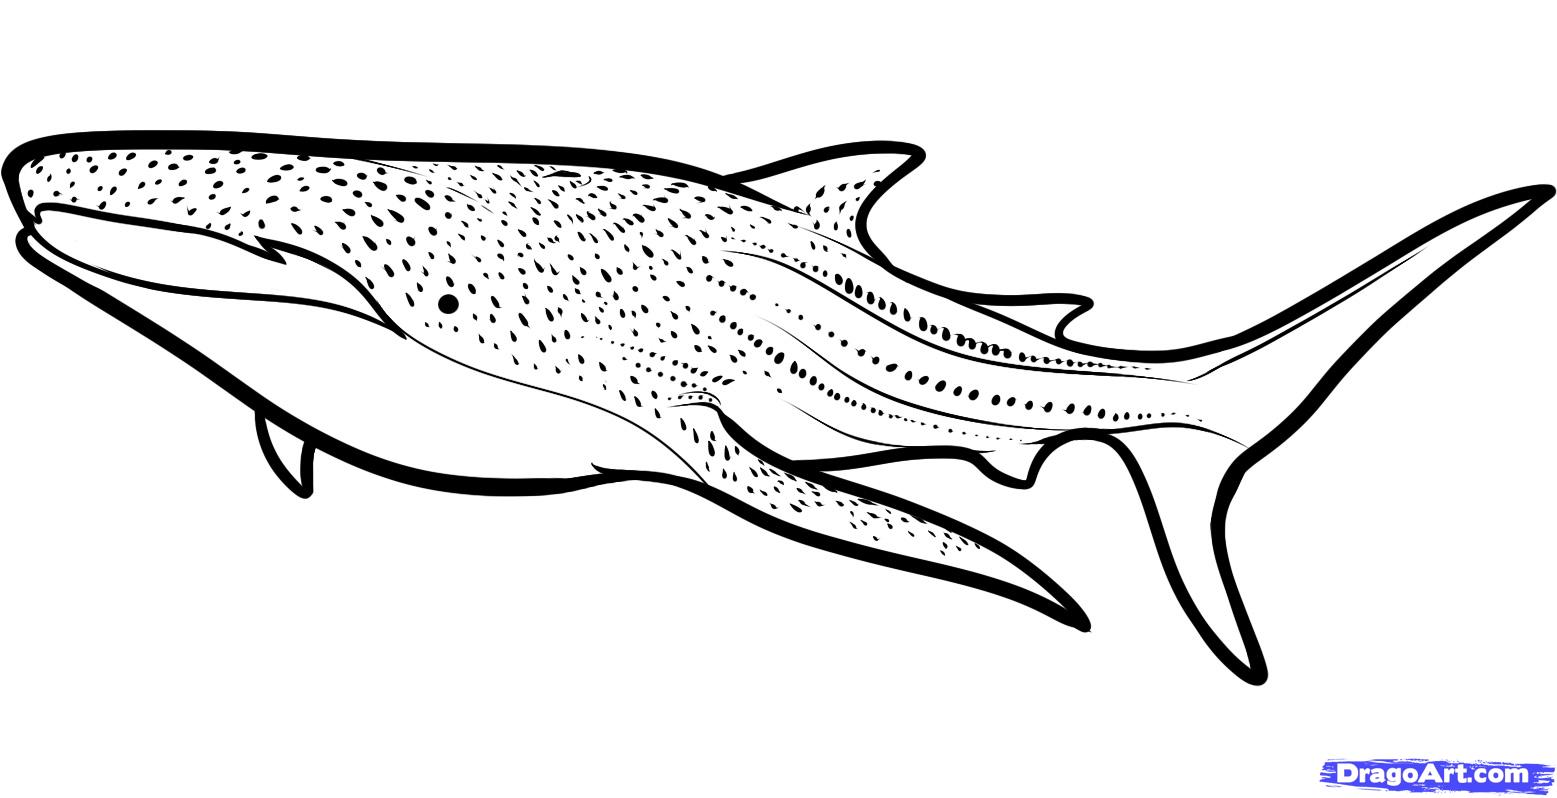 Sharkwhale coloring #11, Download drawings